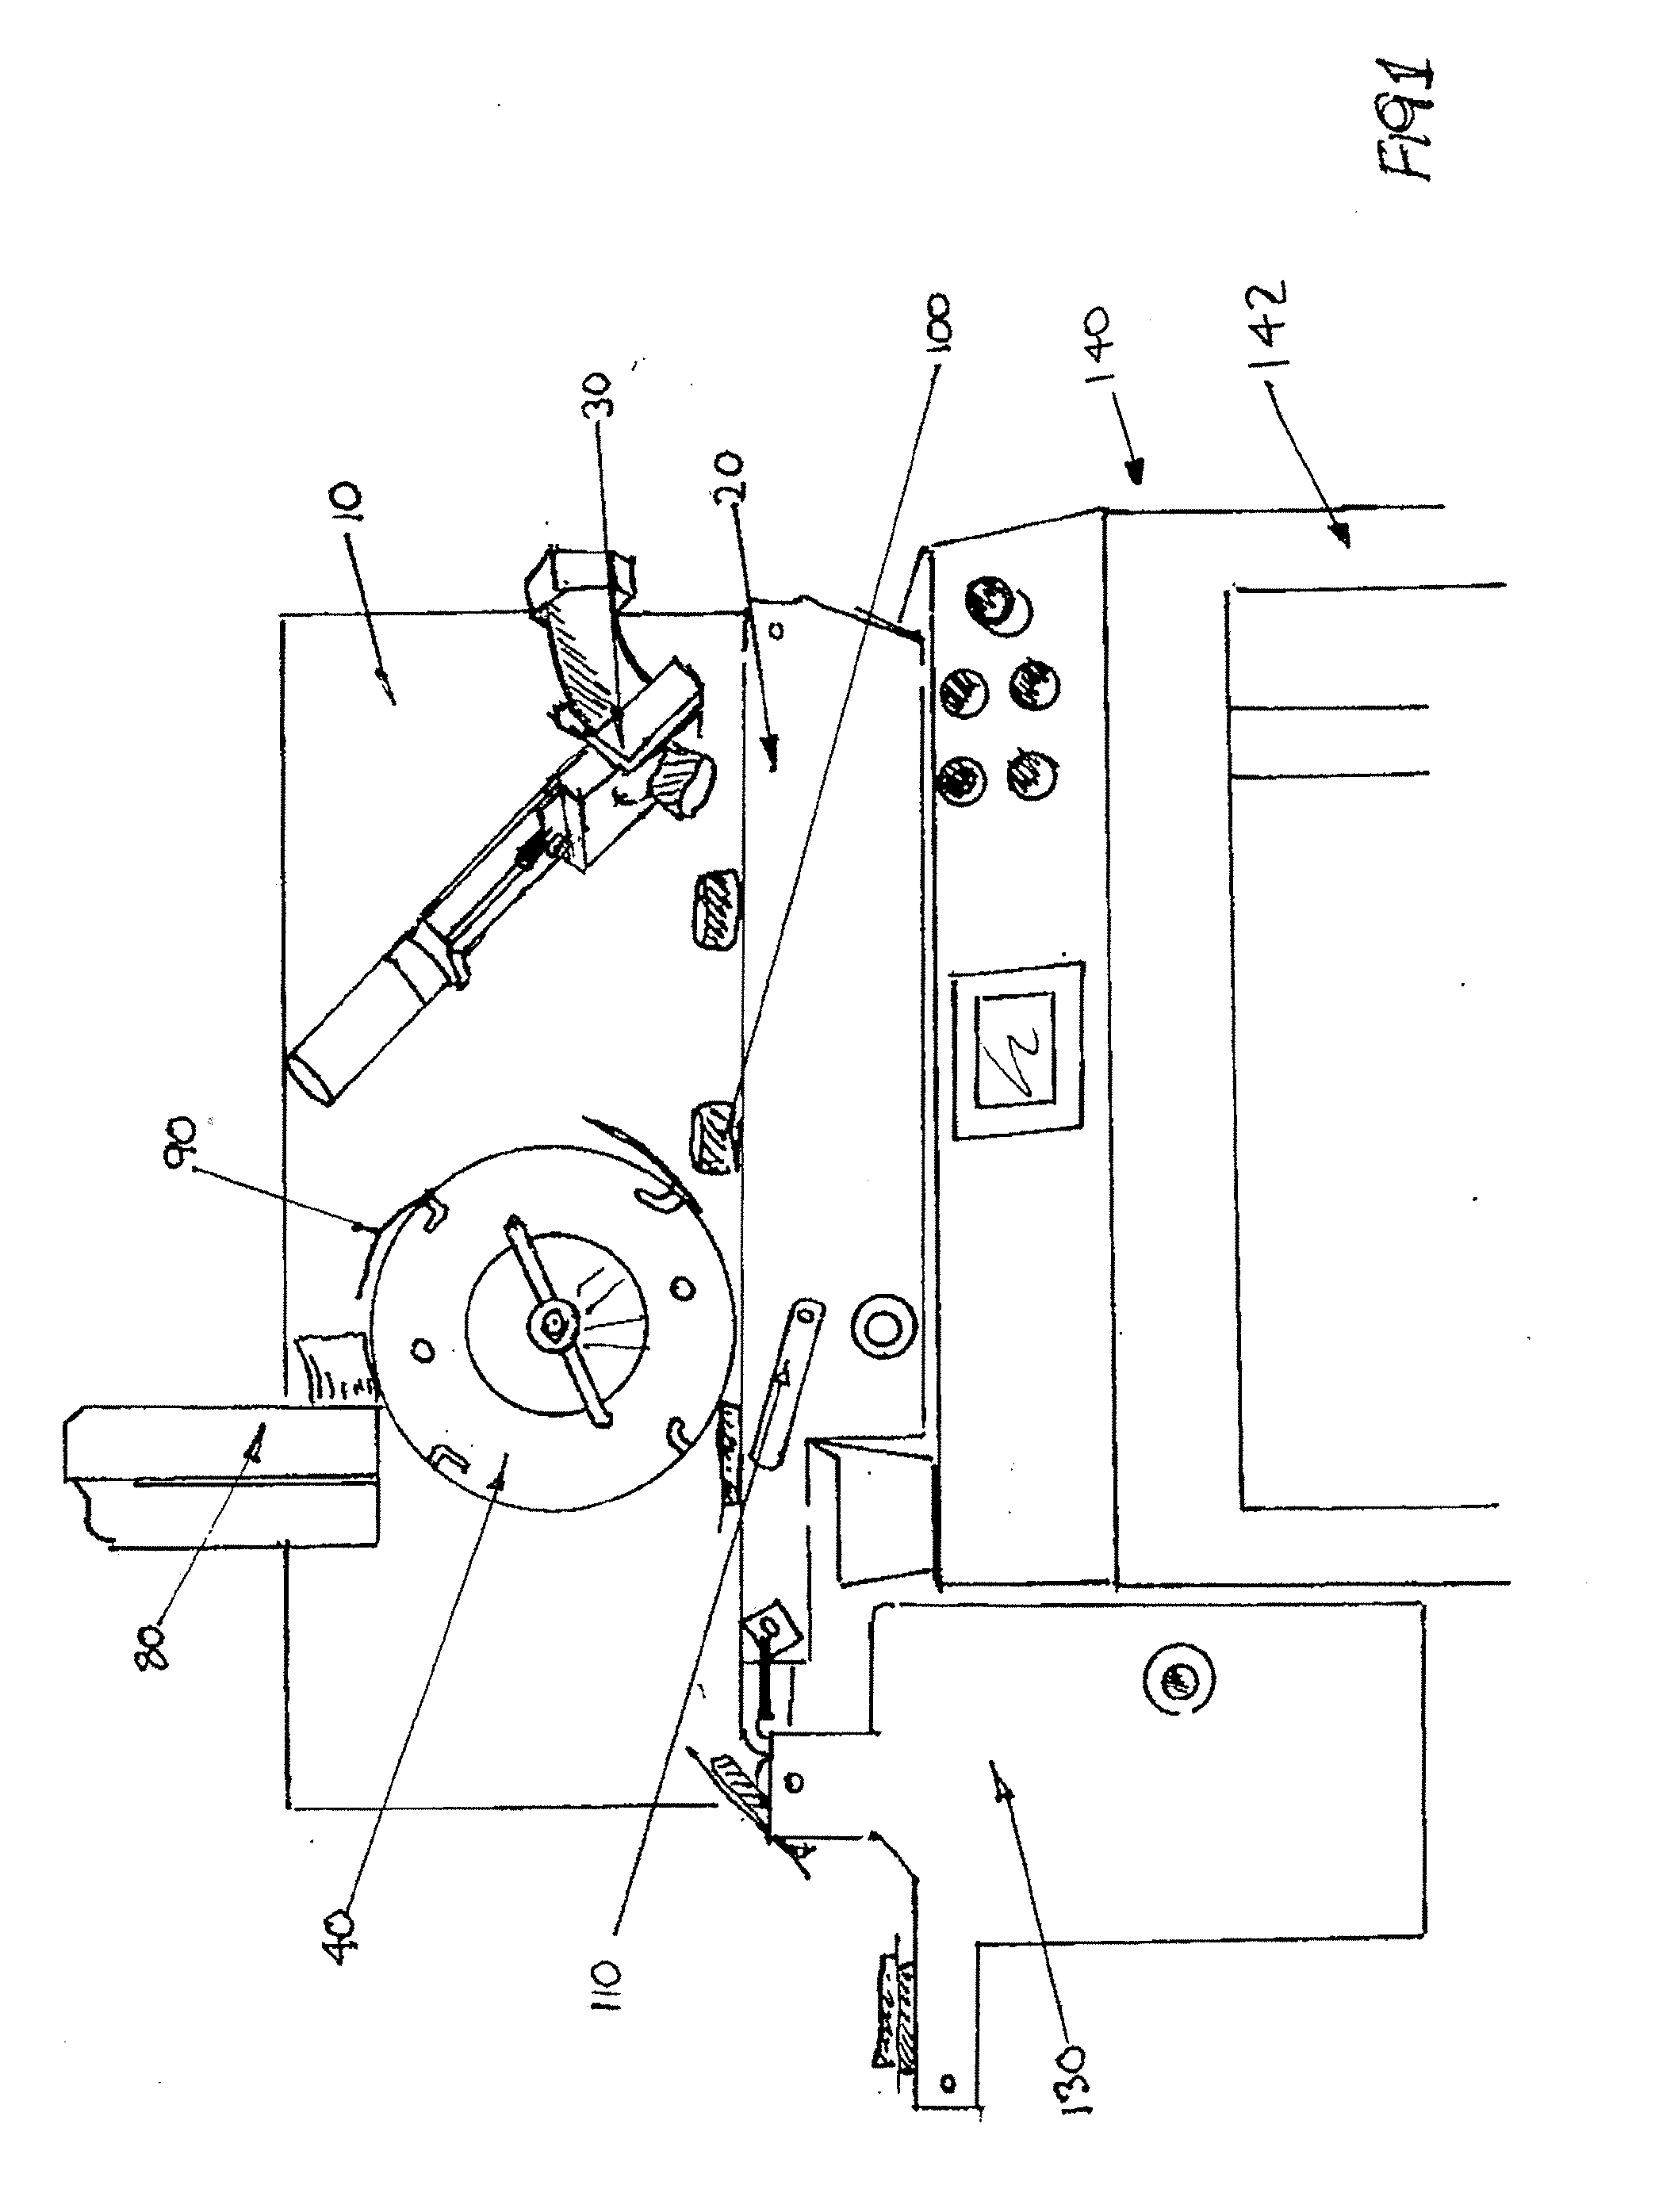 Machine for the production of formed patties with a hand made appearance, and method for interleaving paper and stacking